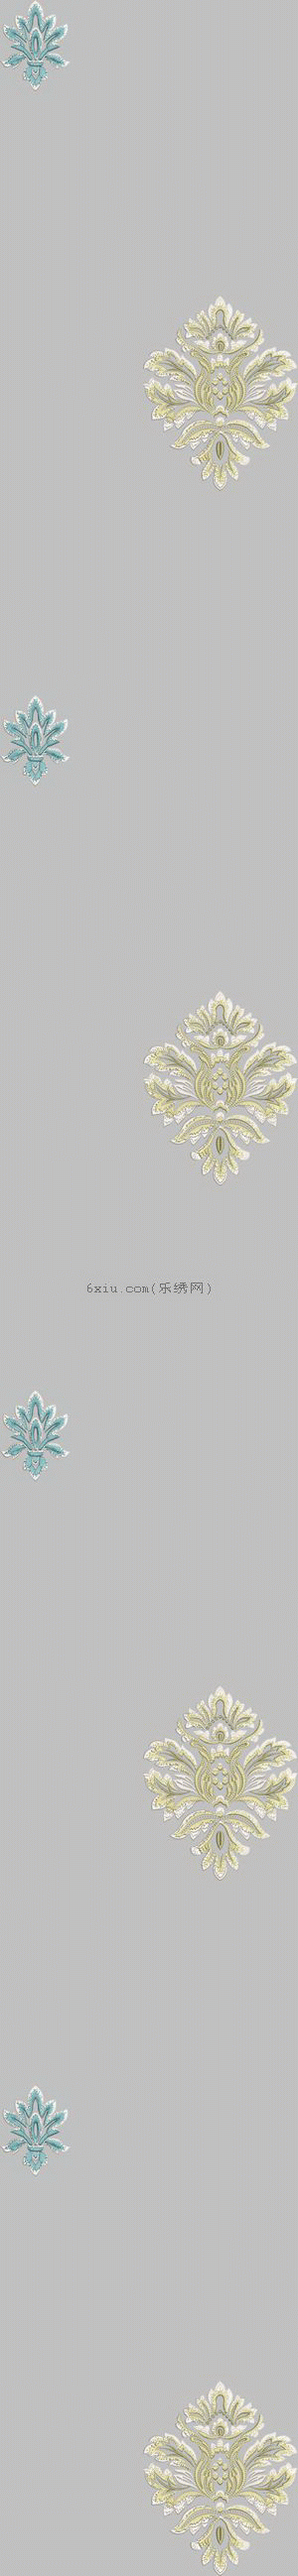 Soft decoration curtains embroidery pattern album